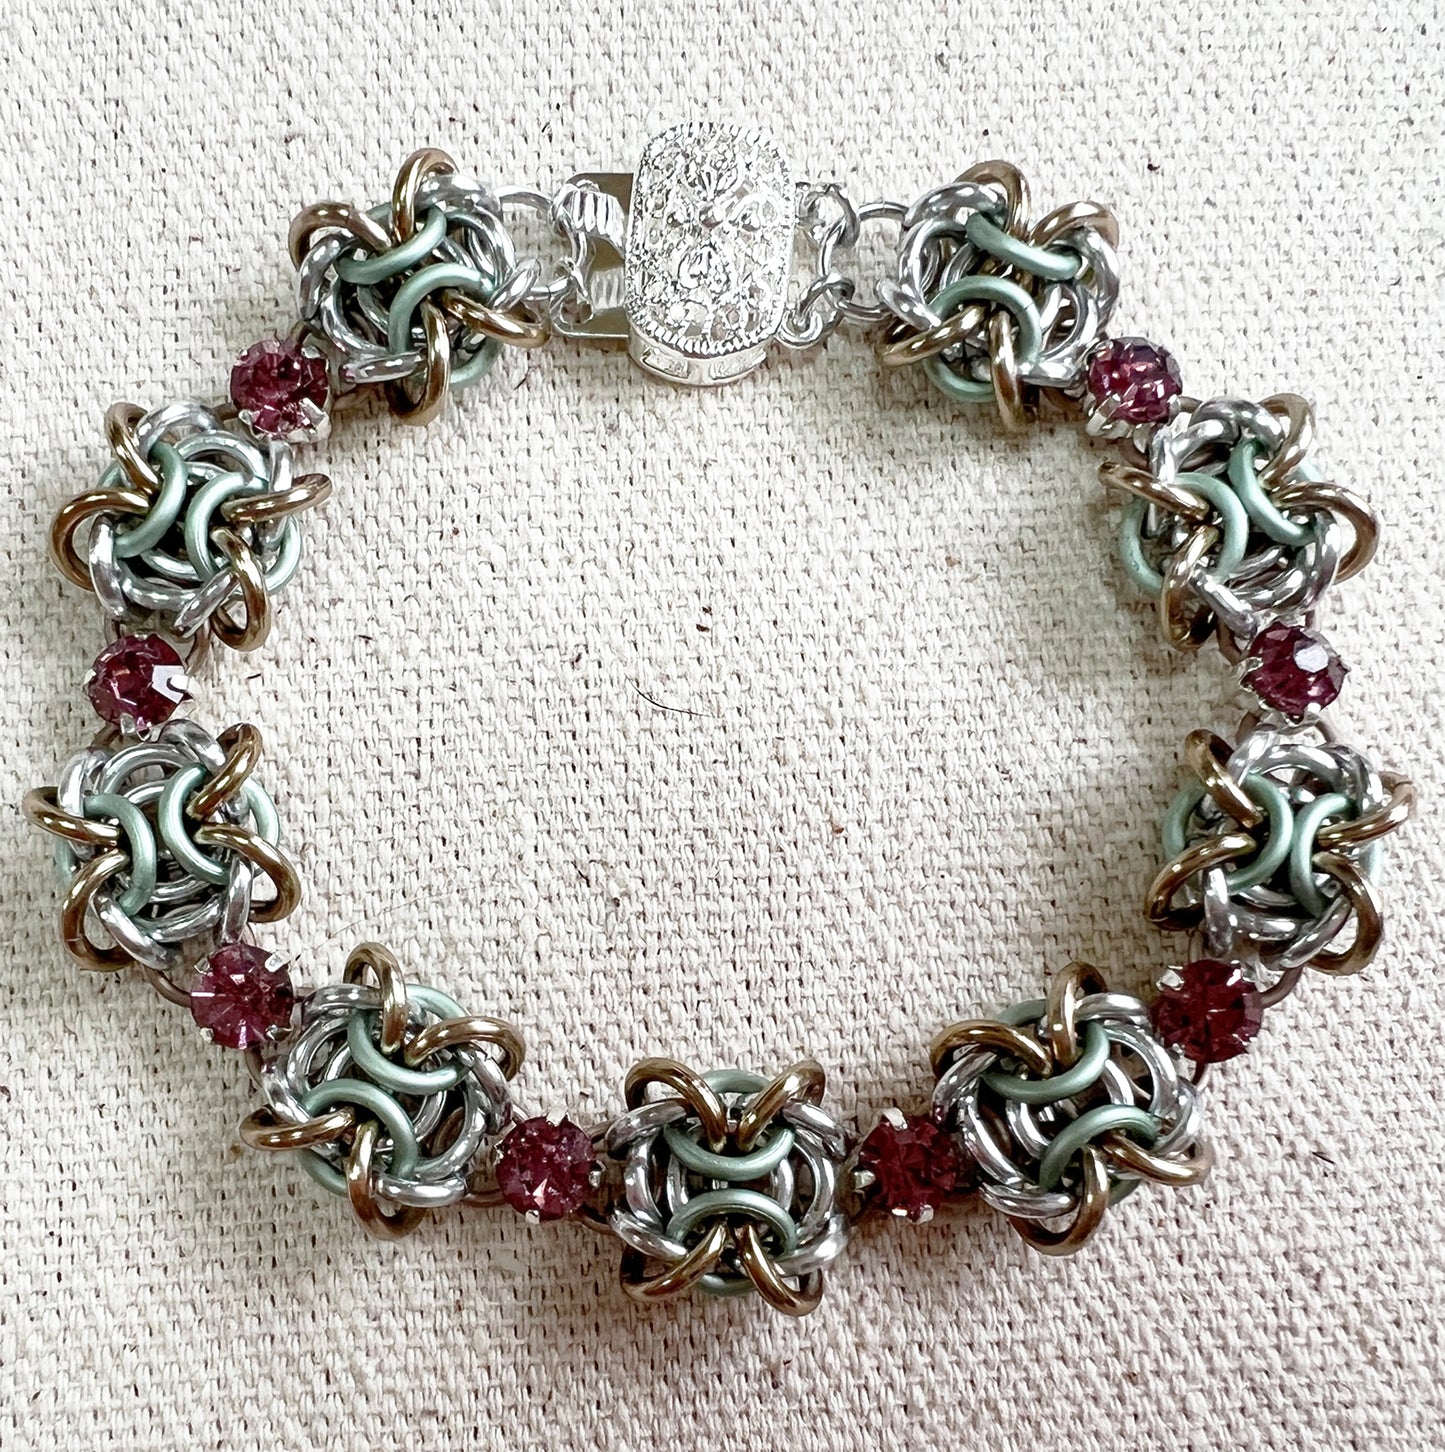 Orc Weave Rhinestone Bracelet Kit with Video Class - Dried Flora